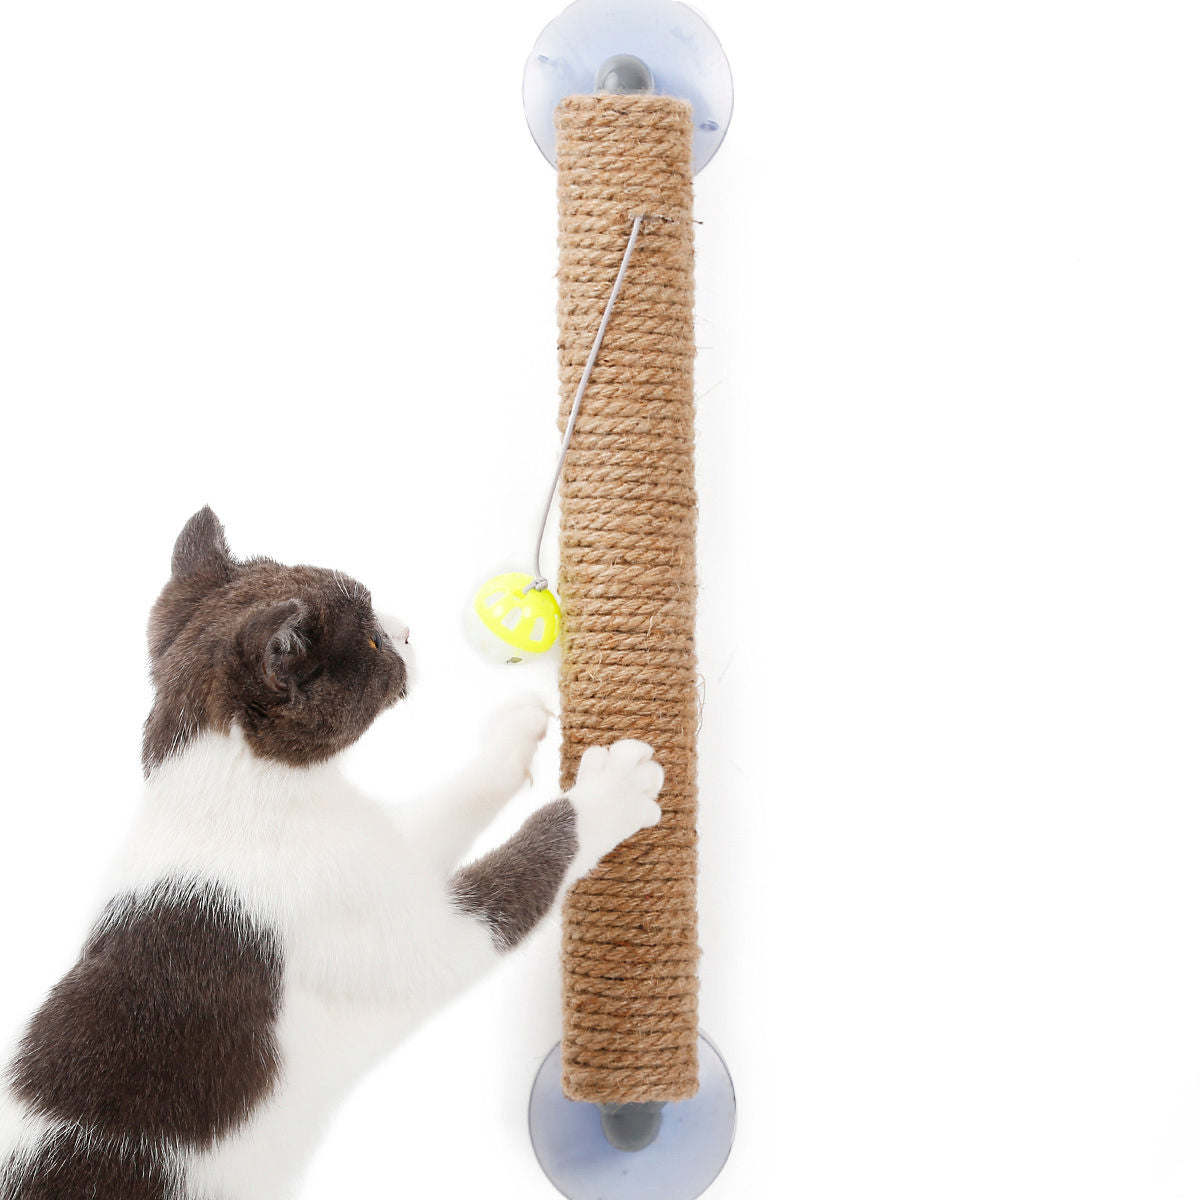 Pet Life Stick and Claw Sisal Rope and Toy